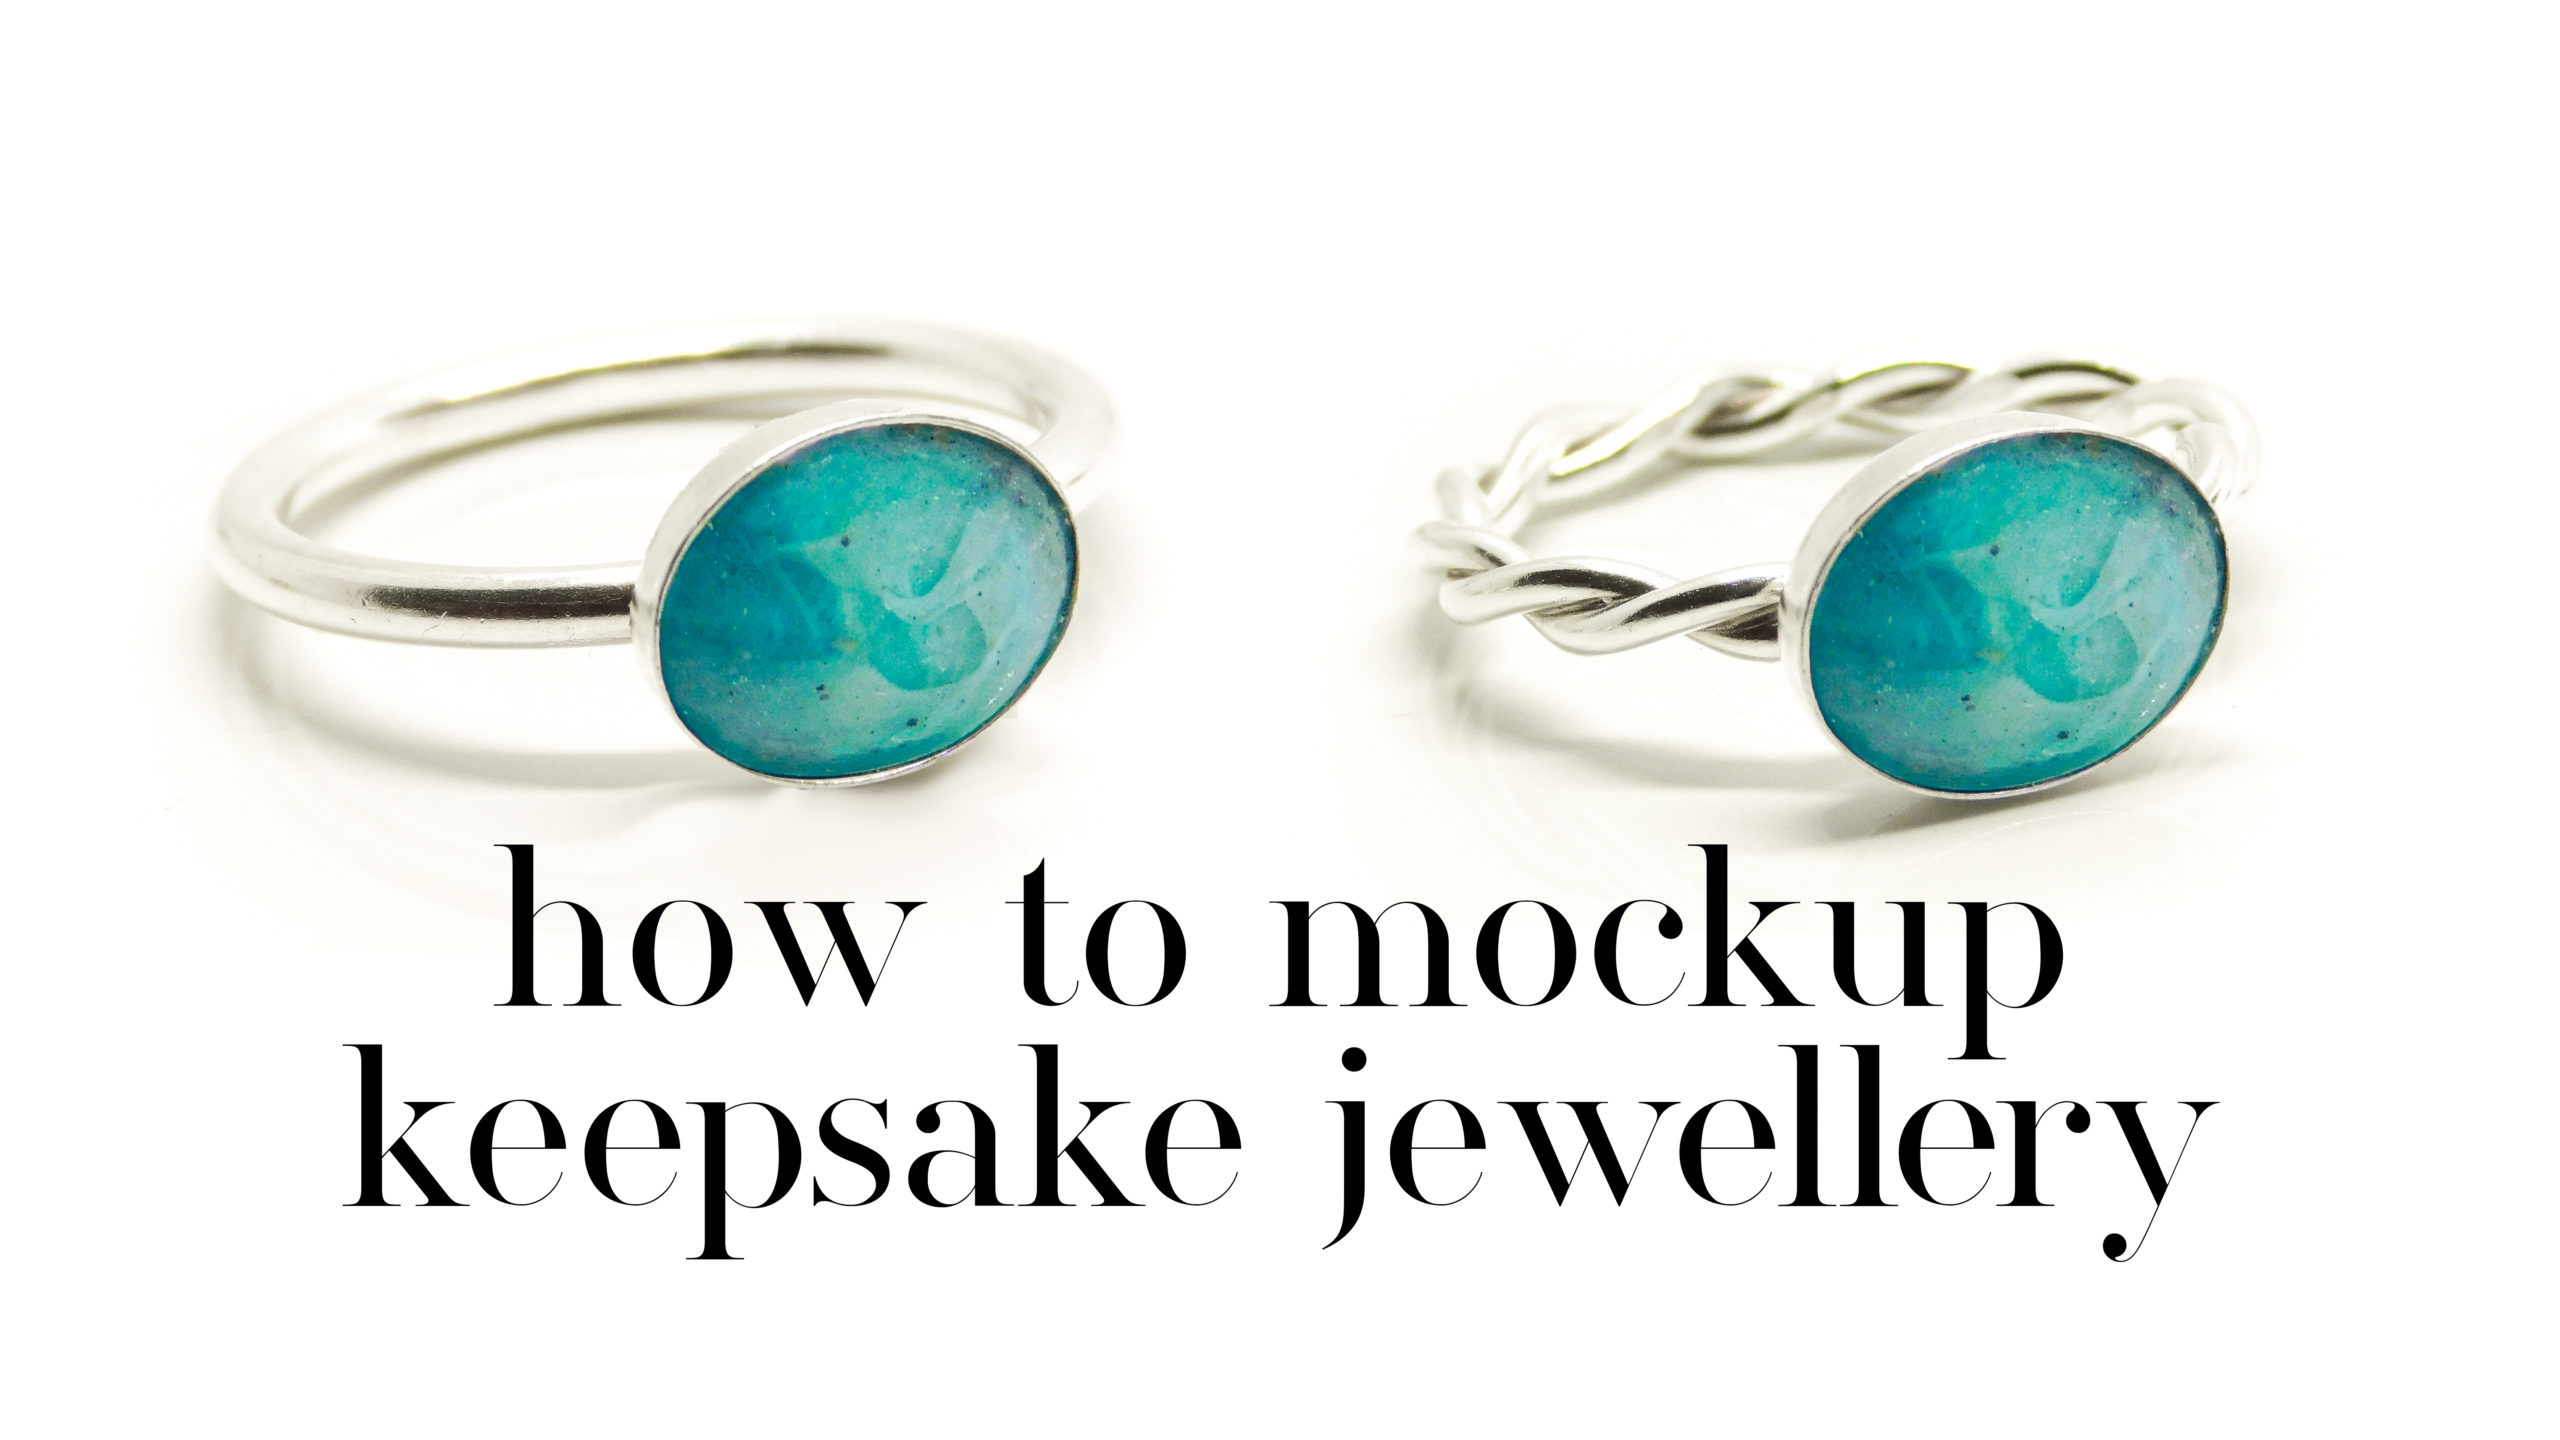 how to mockup keepsake jewellery - classic 10x8mm oval bezel ring setting and twist ring setting both with the same blue lagoon style alcohol ink cremation ashes cabochon